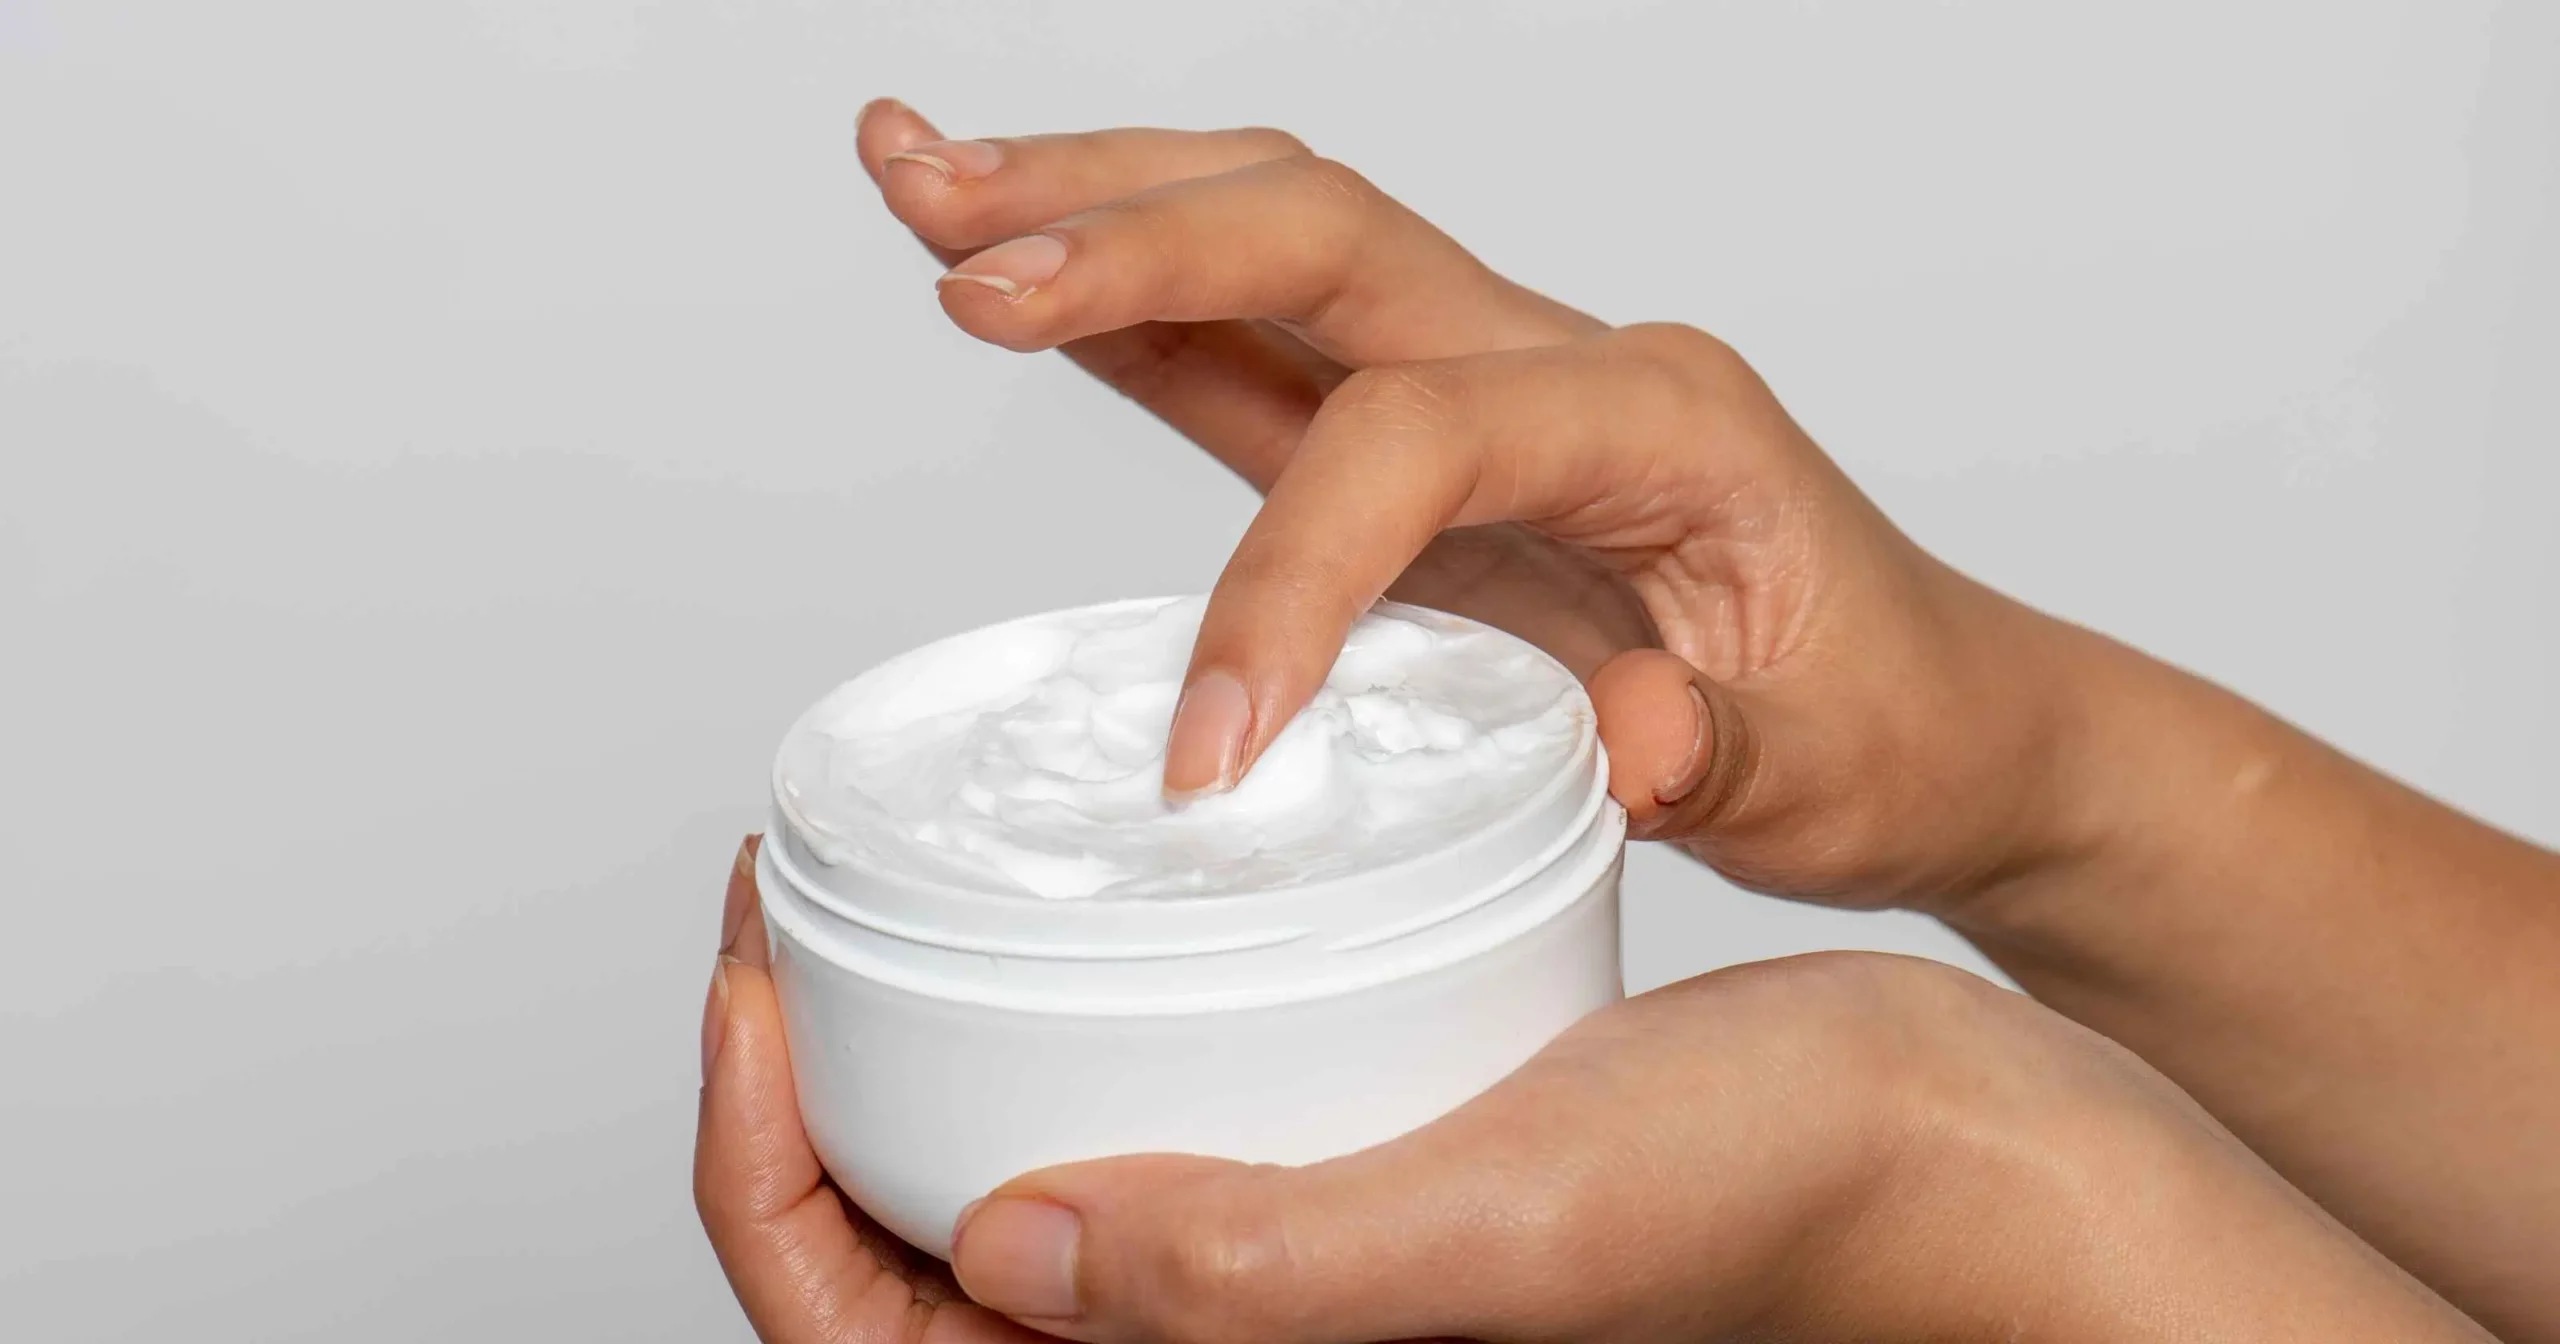 Lotion vs Moisturizer: What’s the Difference?